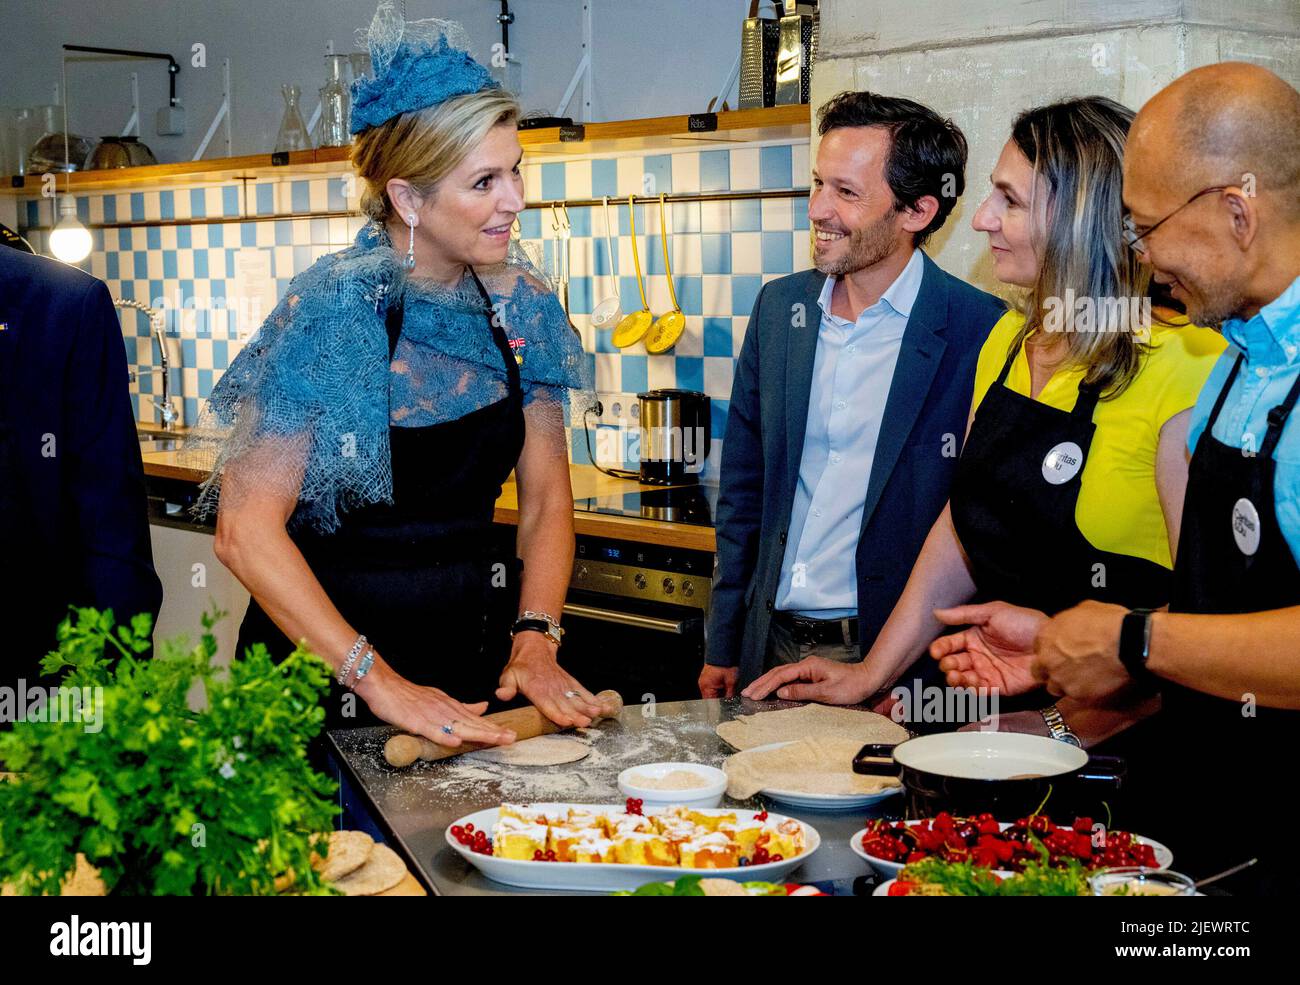 Helmut-Zilk-Park in Vienna, June 28, 2022, Queen Maxima of The Netherlands at the Kulturhaus Brotfabrik in Vienna, on June 28, 2022, for a Workshop food preparation, accompanied by Dr Alexander Van der Bellen, Federal President of the Republic of Austria and Mrs. Doris Schmidauer, his wife, at the 2nd of a 3 days State-visit to Austria Photo: Albert Nieboer/Netherlands OUT/Point de Vue OUT Stock Photo